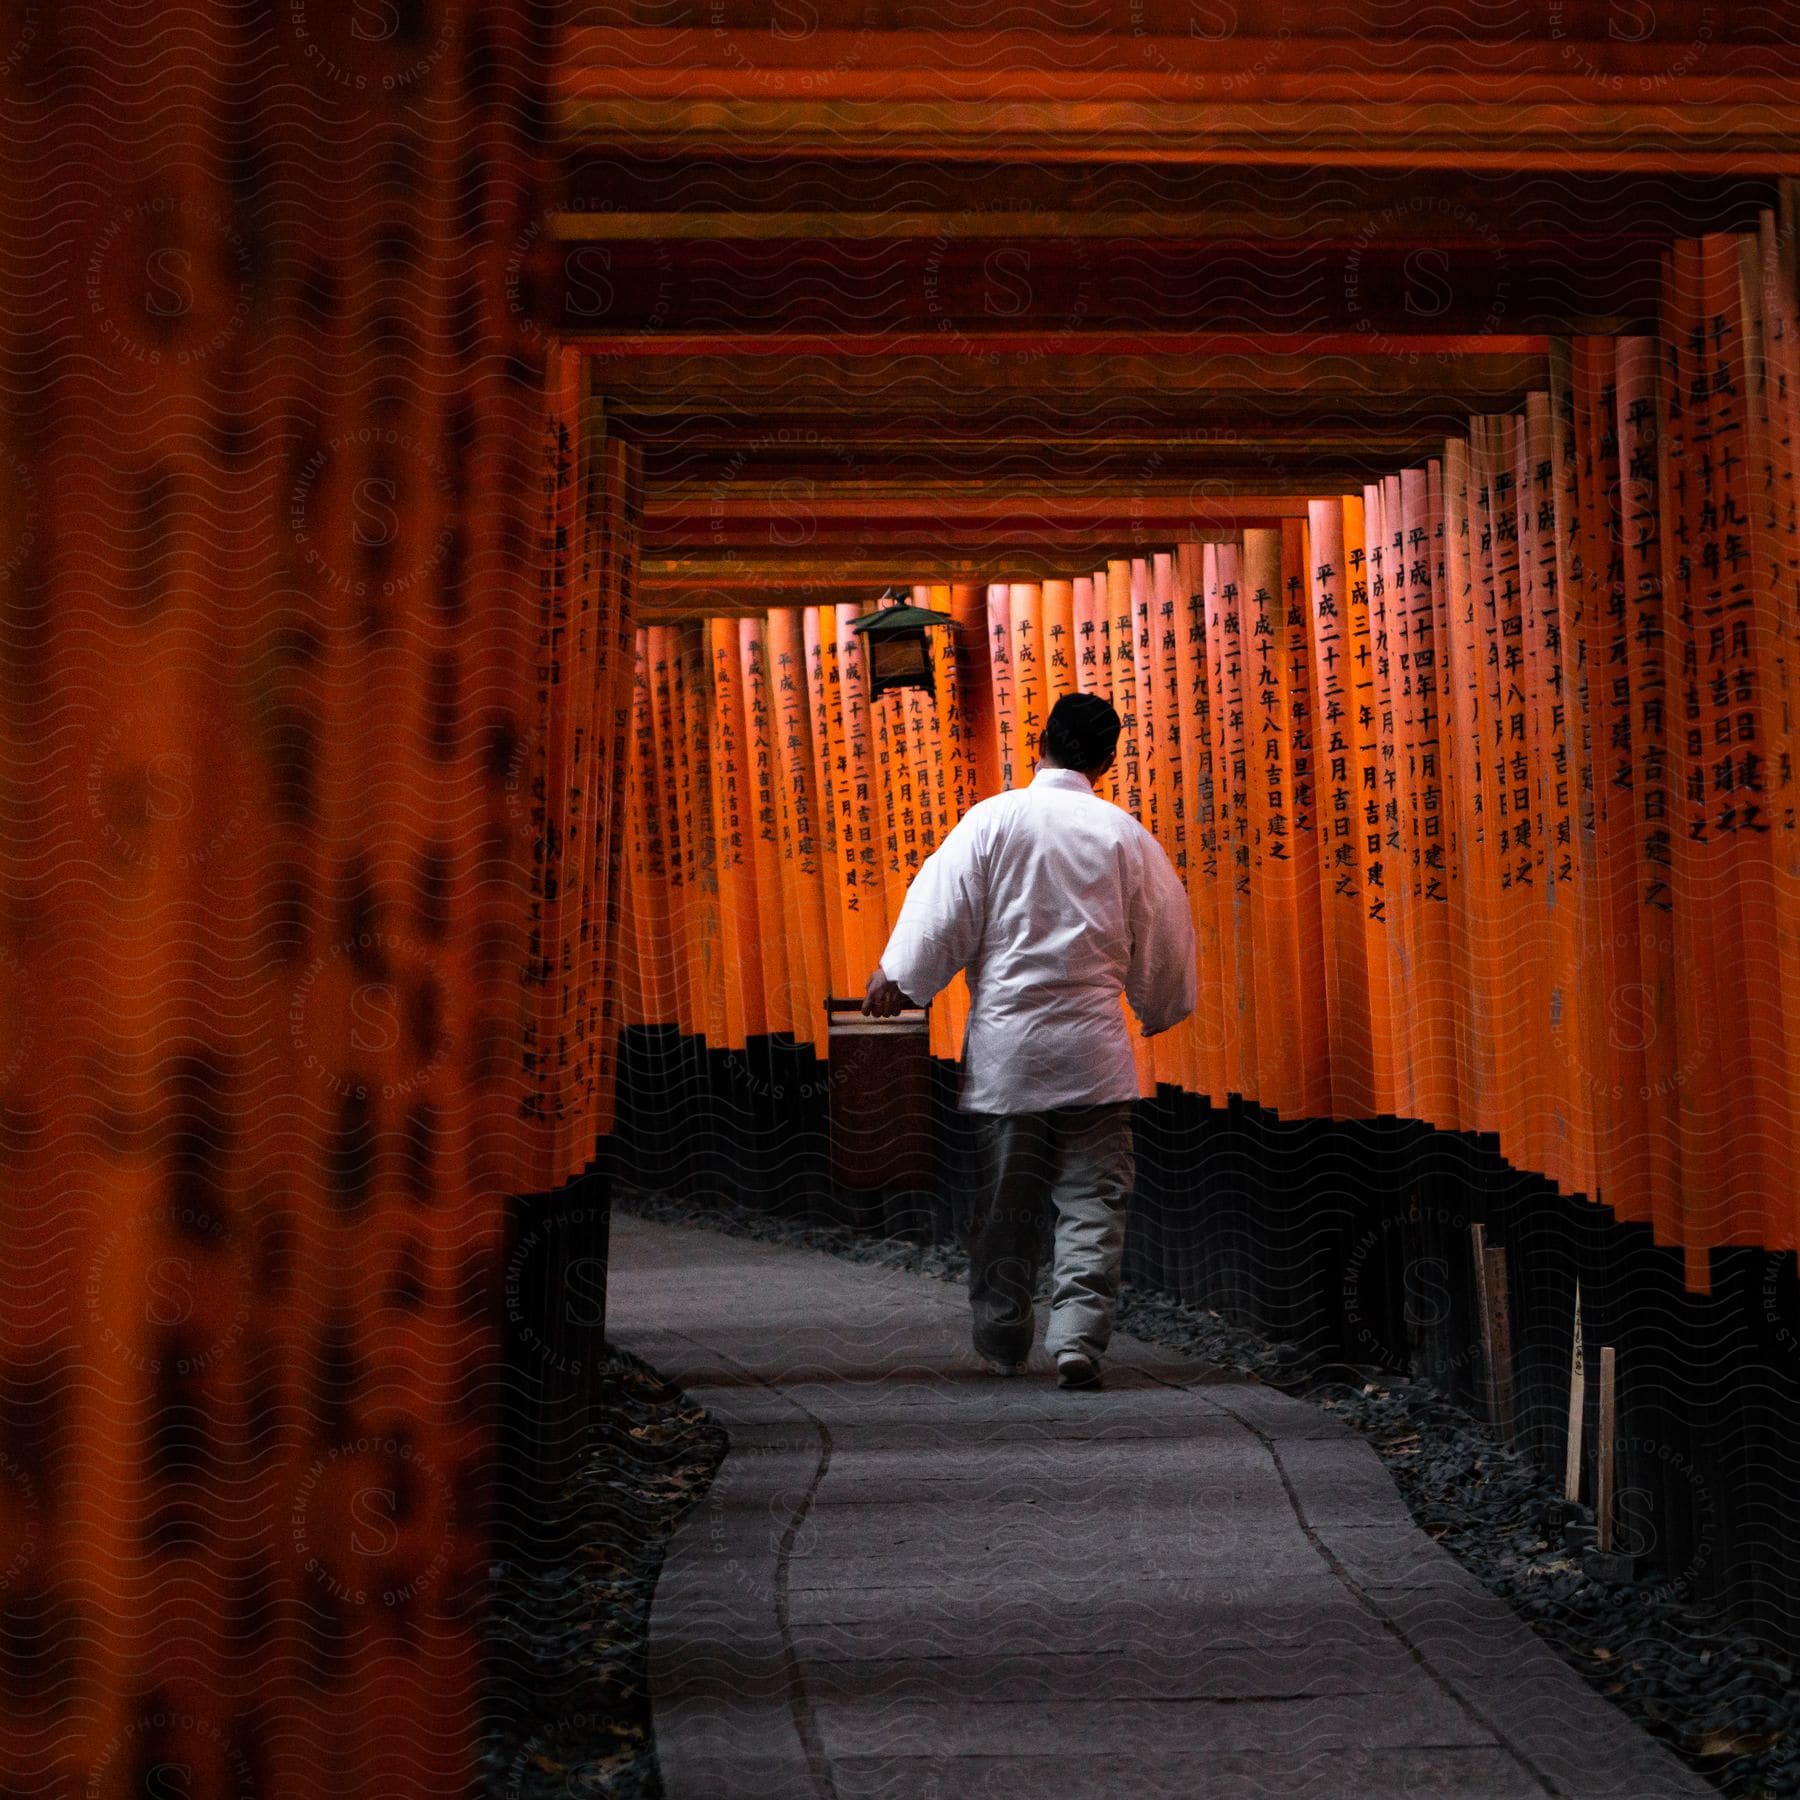 Man carrying a large food delivery container walks through a corridor formed of narrow posts.